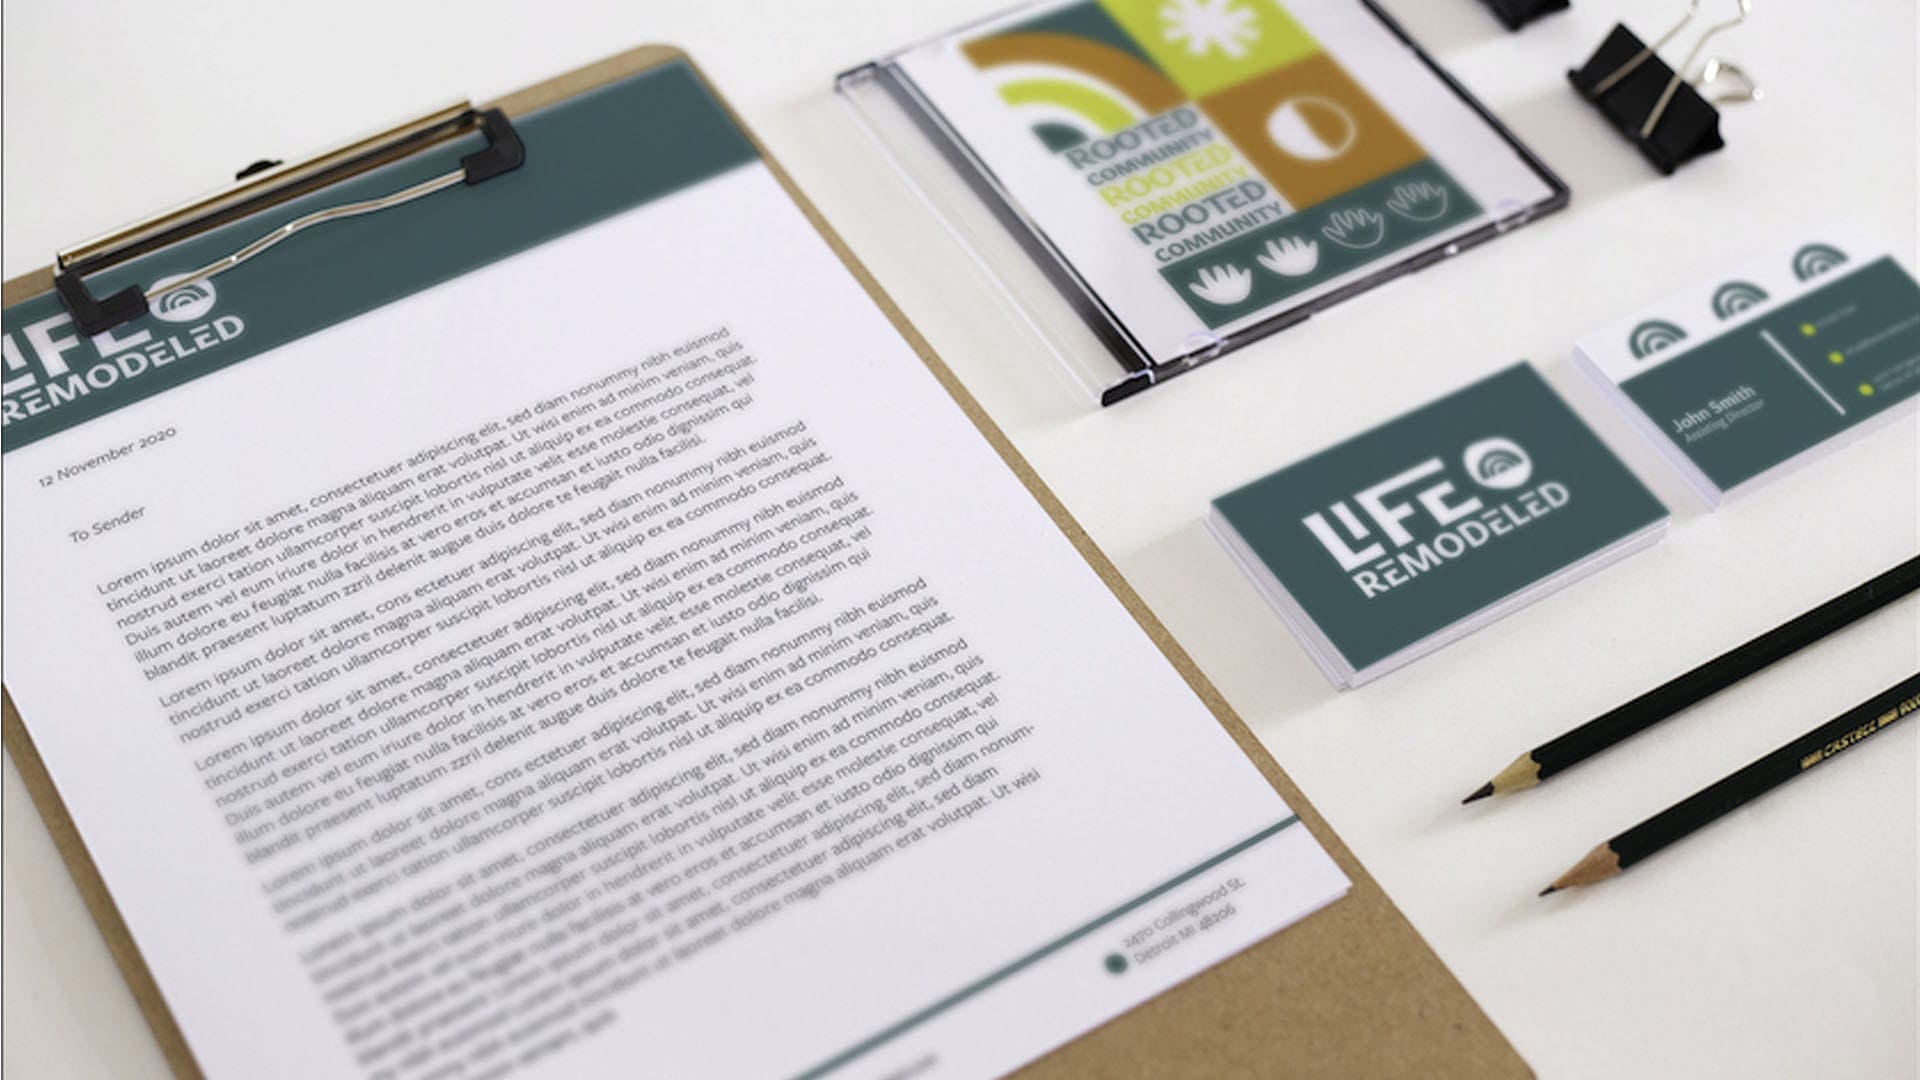 Complete rebranding of Life Remodeled. Photo showing a piece of paper with black text on a clipboard next to two black pencils, two binder clips, two dark green business cards, and a cd on a white background. Both the header of the paper and the bussiness cards show the white logo of the company with stylized text. The cd cover shows different different symbols associated with Life Remodeled, with a color scheme of yellow, white, dark green, orange, and white.